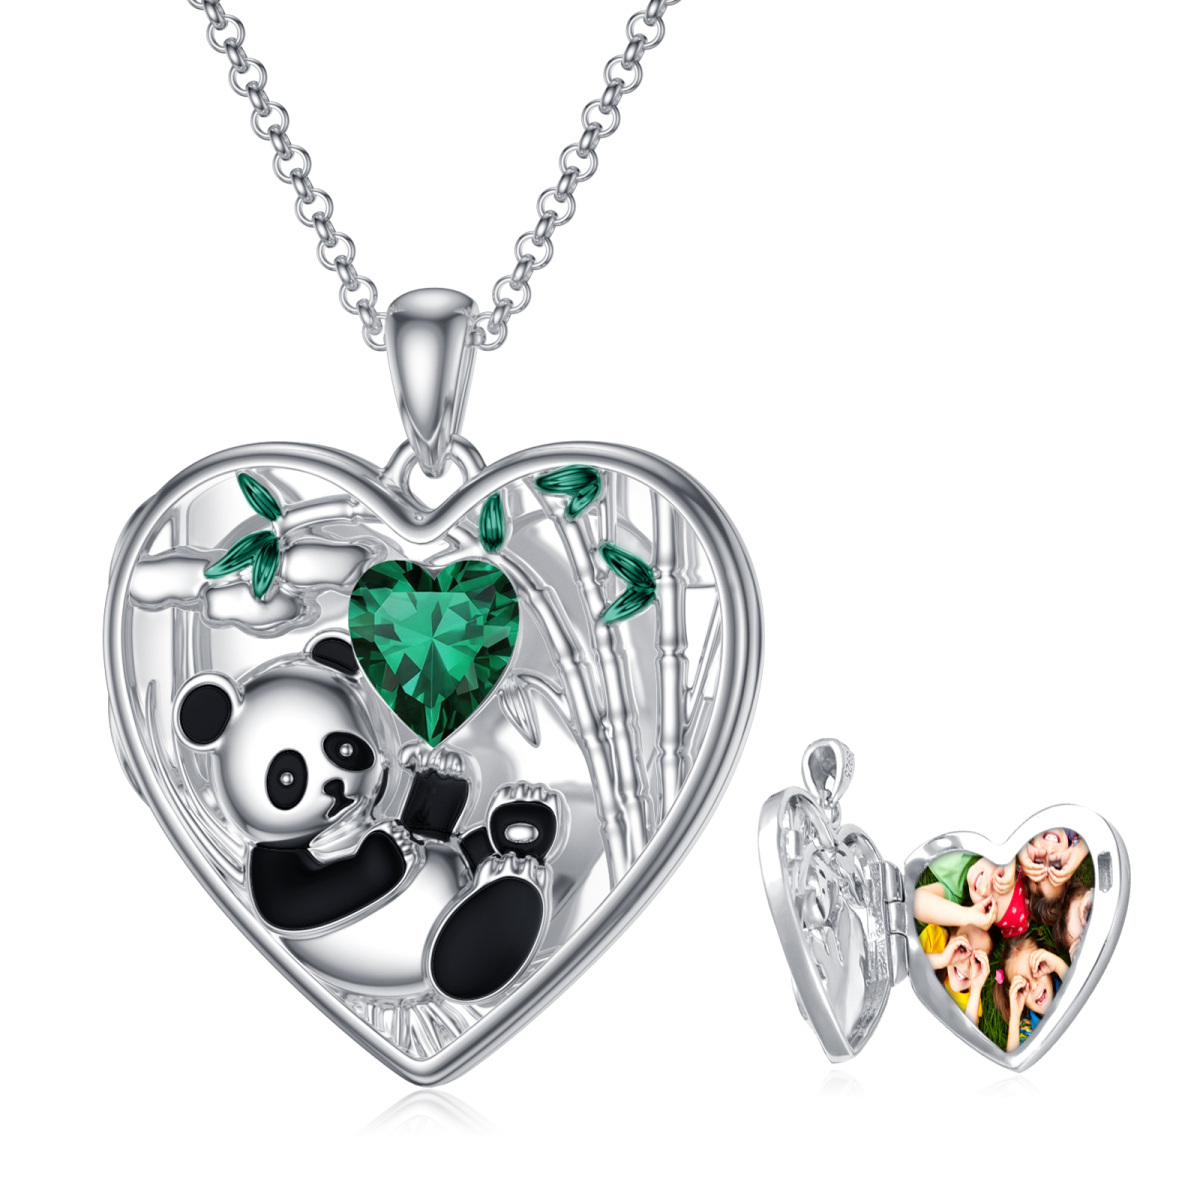 Sterling Silver Heart Shaped Panda Personalized Photo Locket Necklace-1